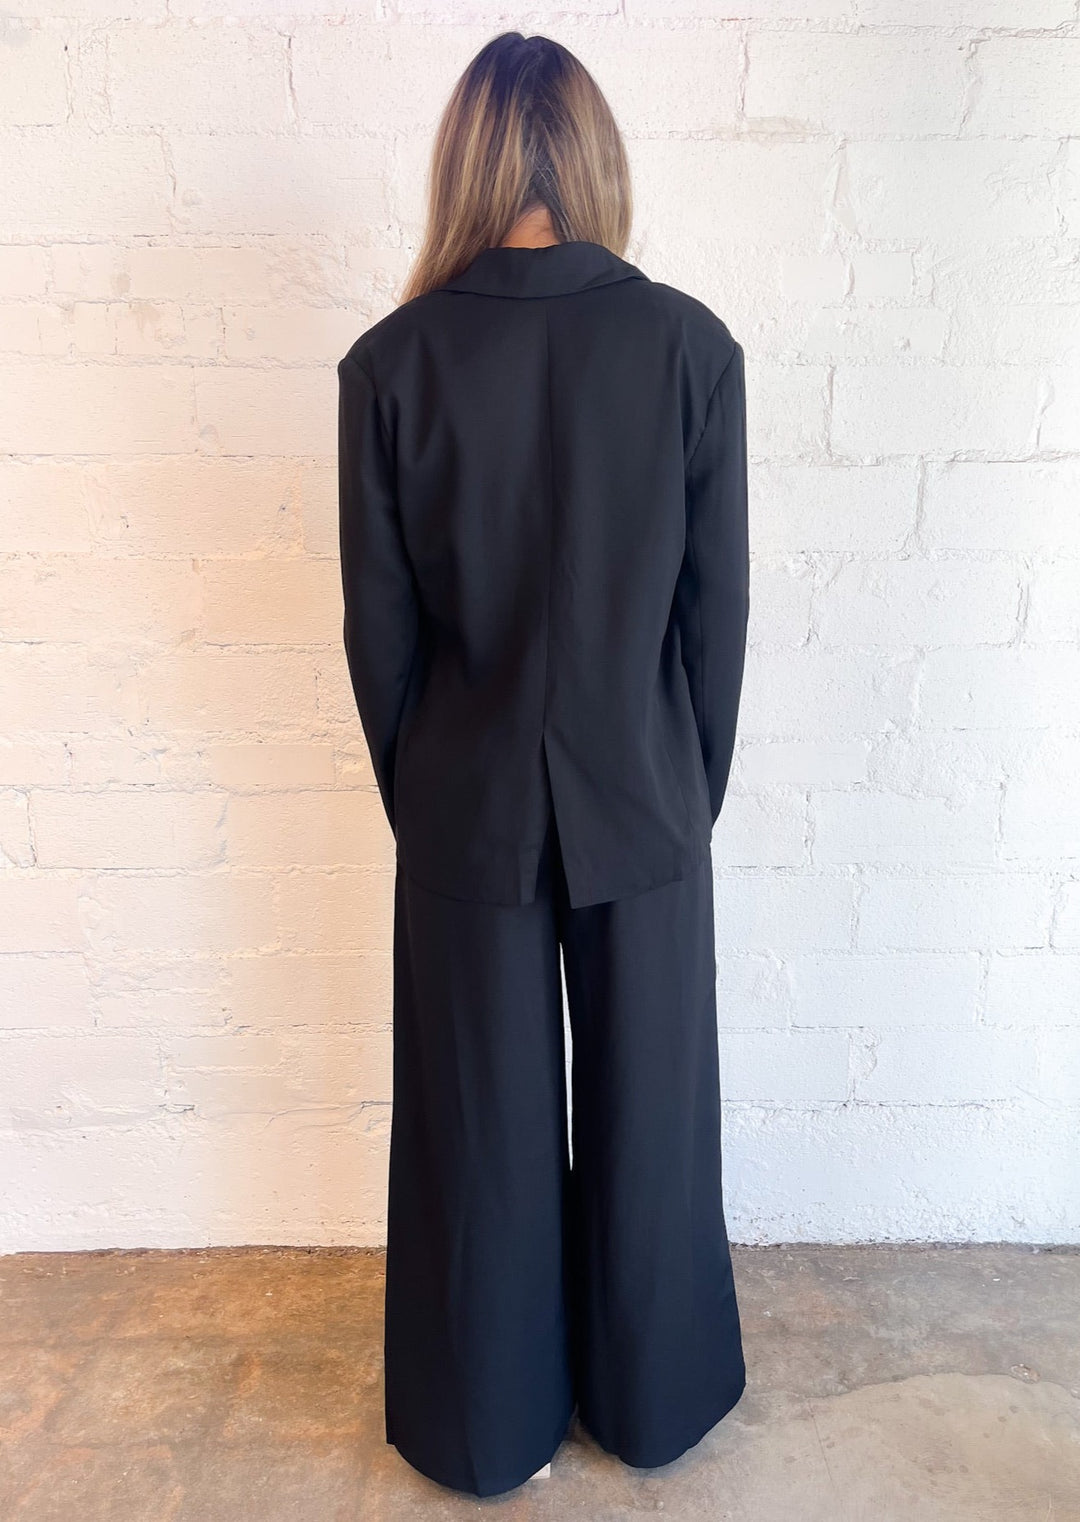 Cool Perfection Wide Leg Trouser, Pants, Adeline, Adeline, dallas boutique, dallas texas, texas boutique, women's boutique dallas, adeline boutique, dallas boutique, trendy boutique, affordable boutique